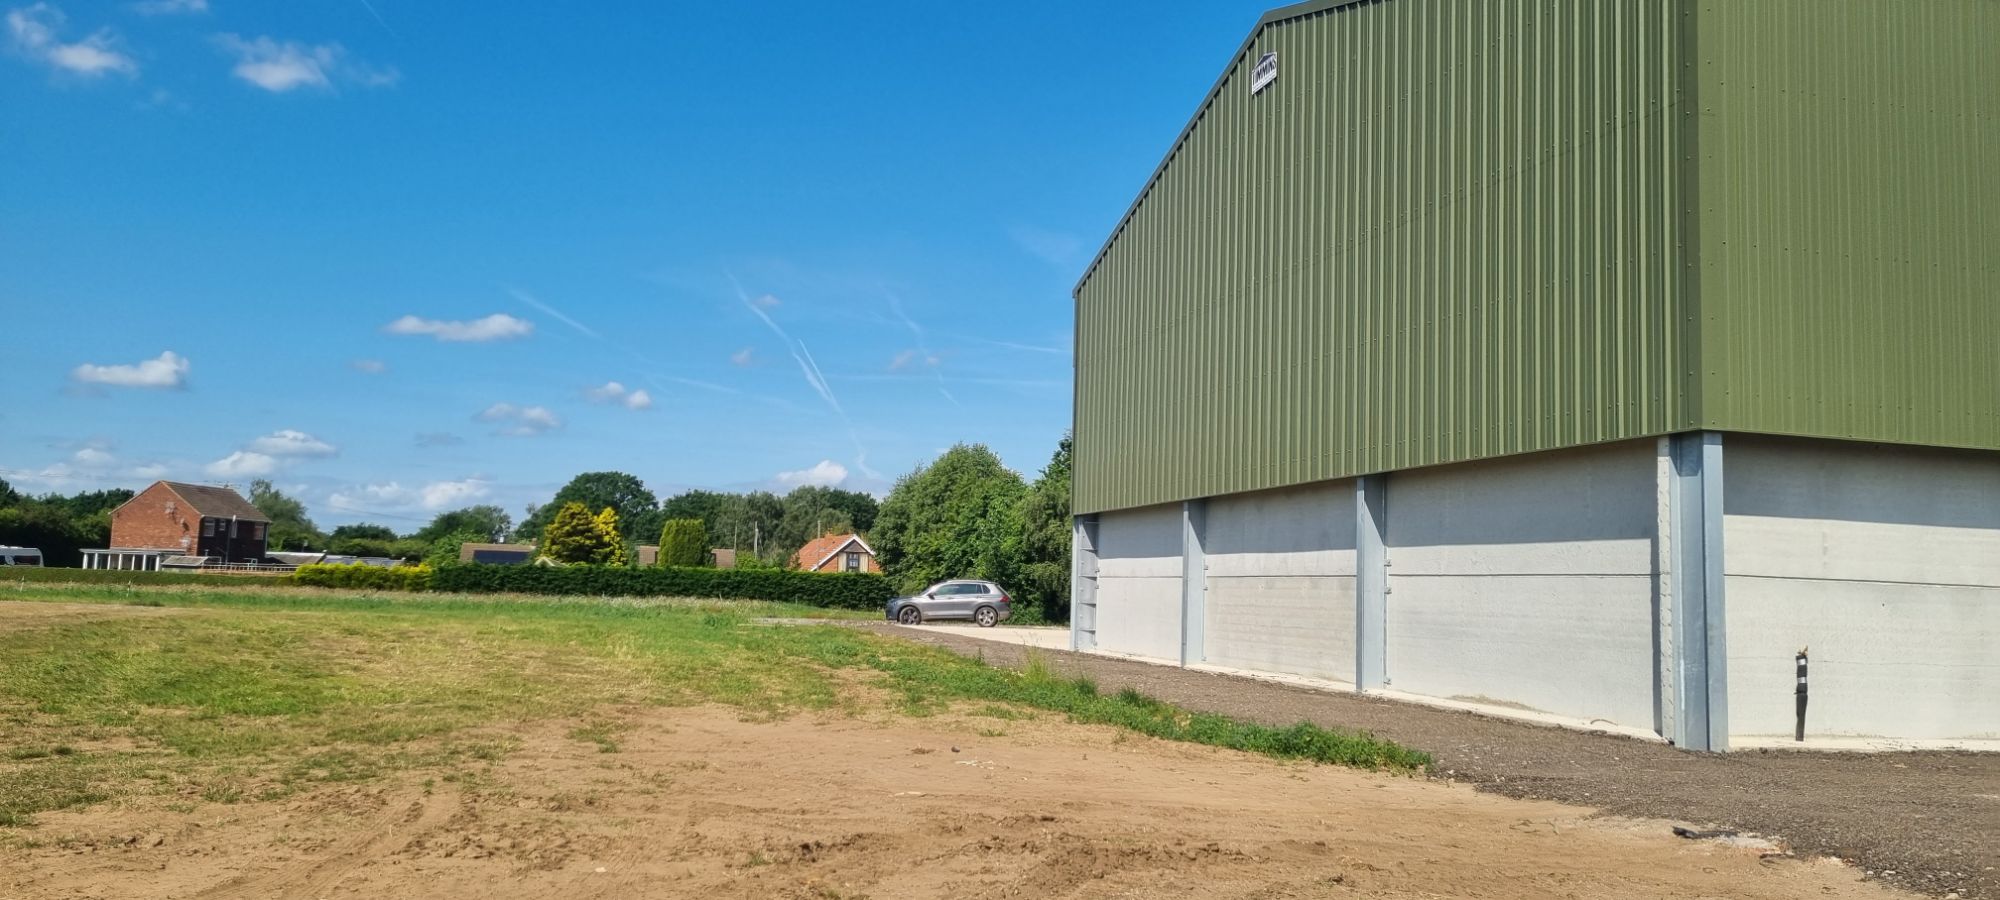 Class R Prior Approval - Agricultural to Commercial (including storage and office space)